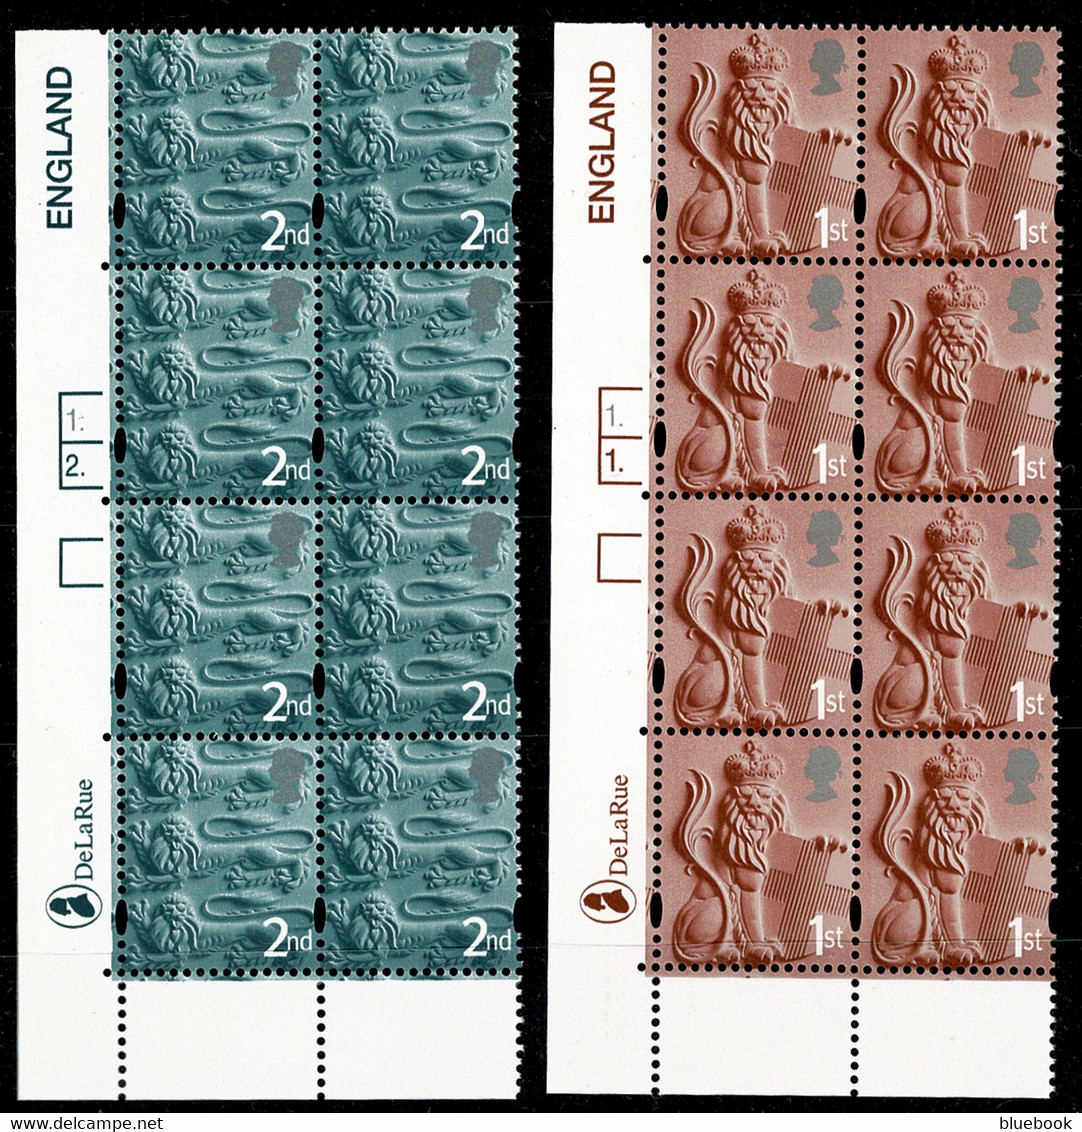 Ref 1572 - GB 2003 England 2nd Class - Euro "E" Regionals In Plate Blocks Of 8 - MNH - Angleterre